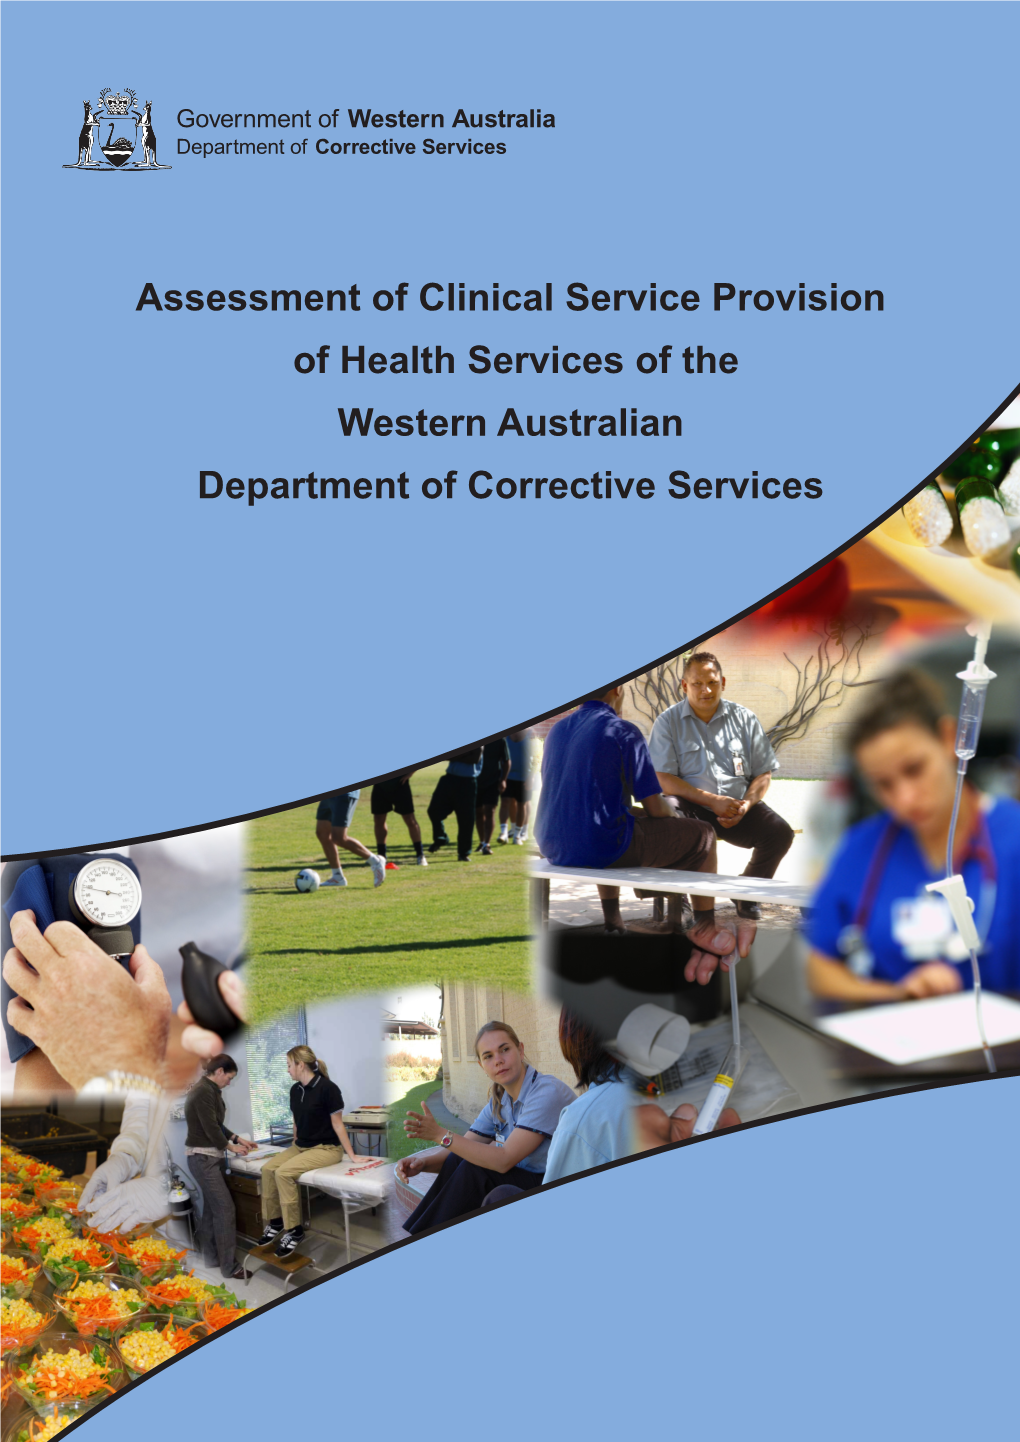 Assessment of Clinical Service Provision of Health Services of the Western Australian Department of Corrective Services Prepared by Dr Margaret Stevens, June 2010